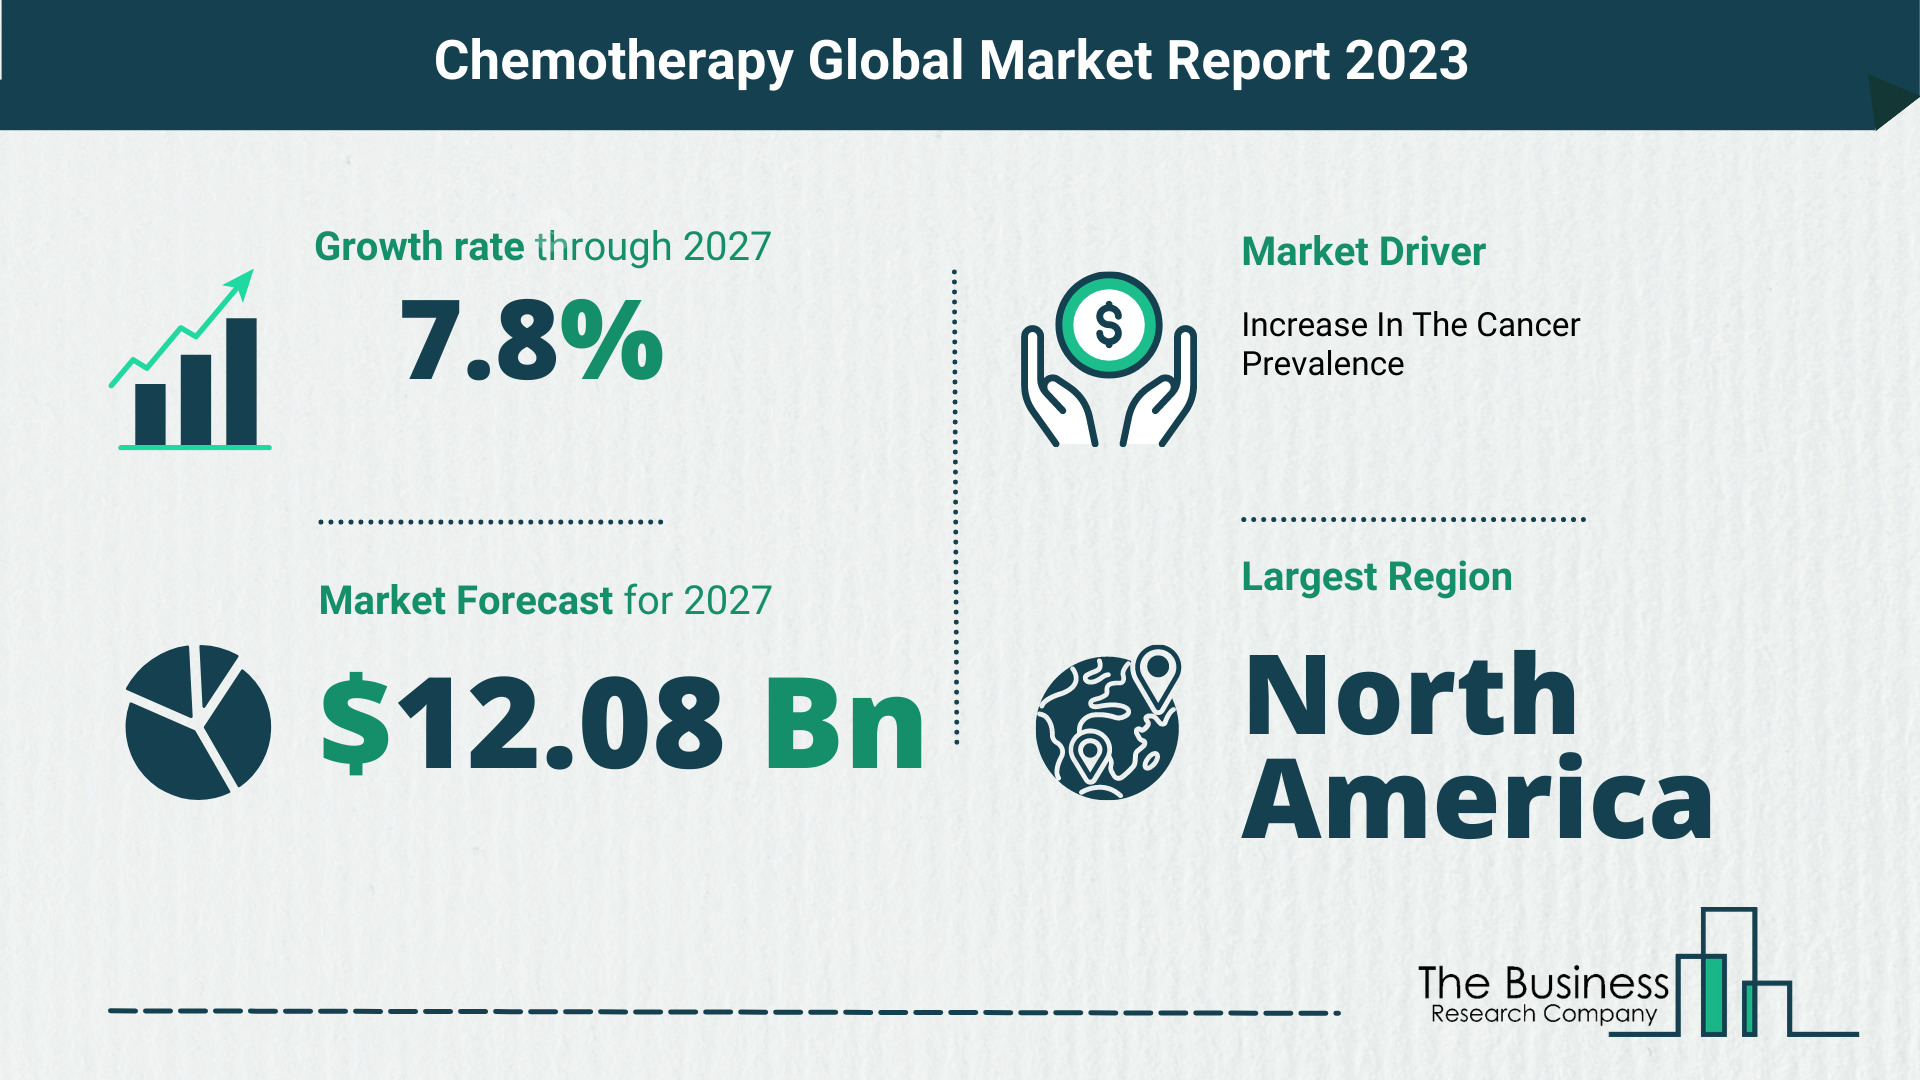 What Will The Chemotherapy Market Look Like In 2023?